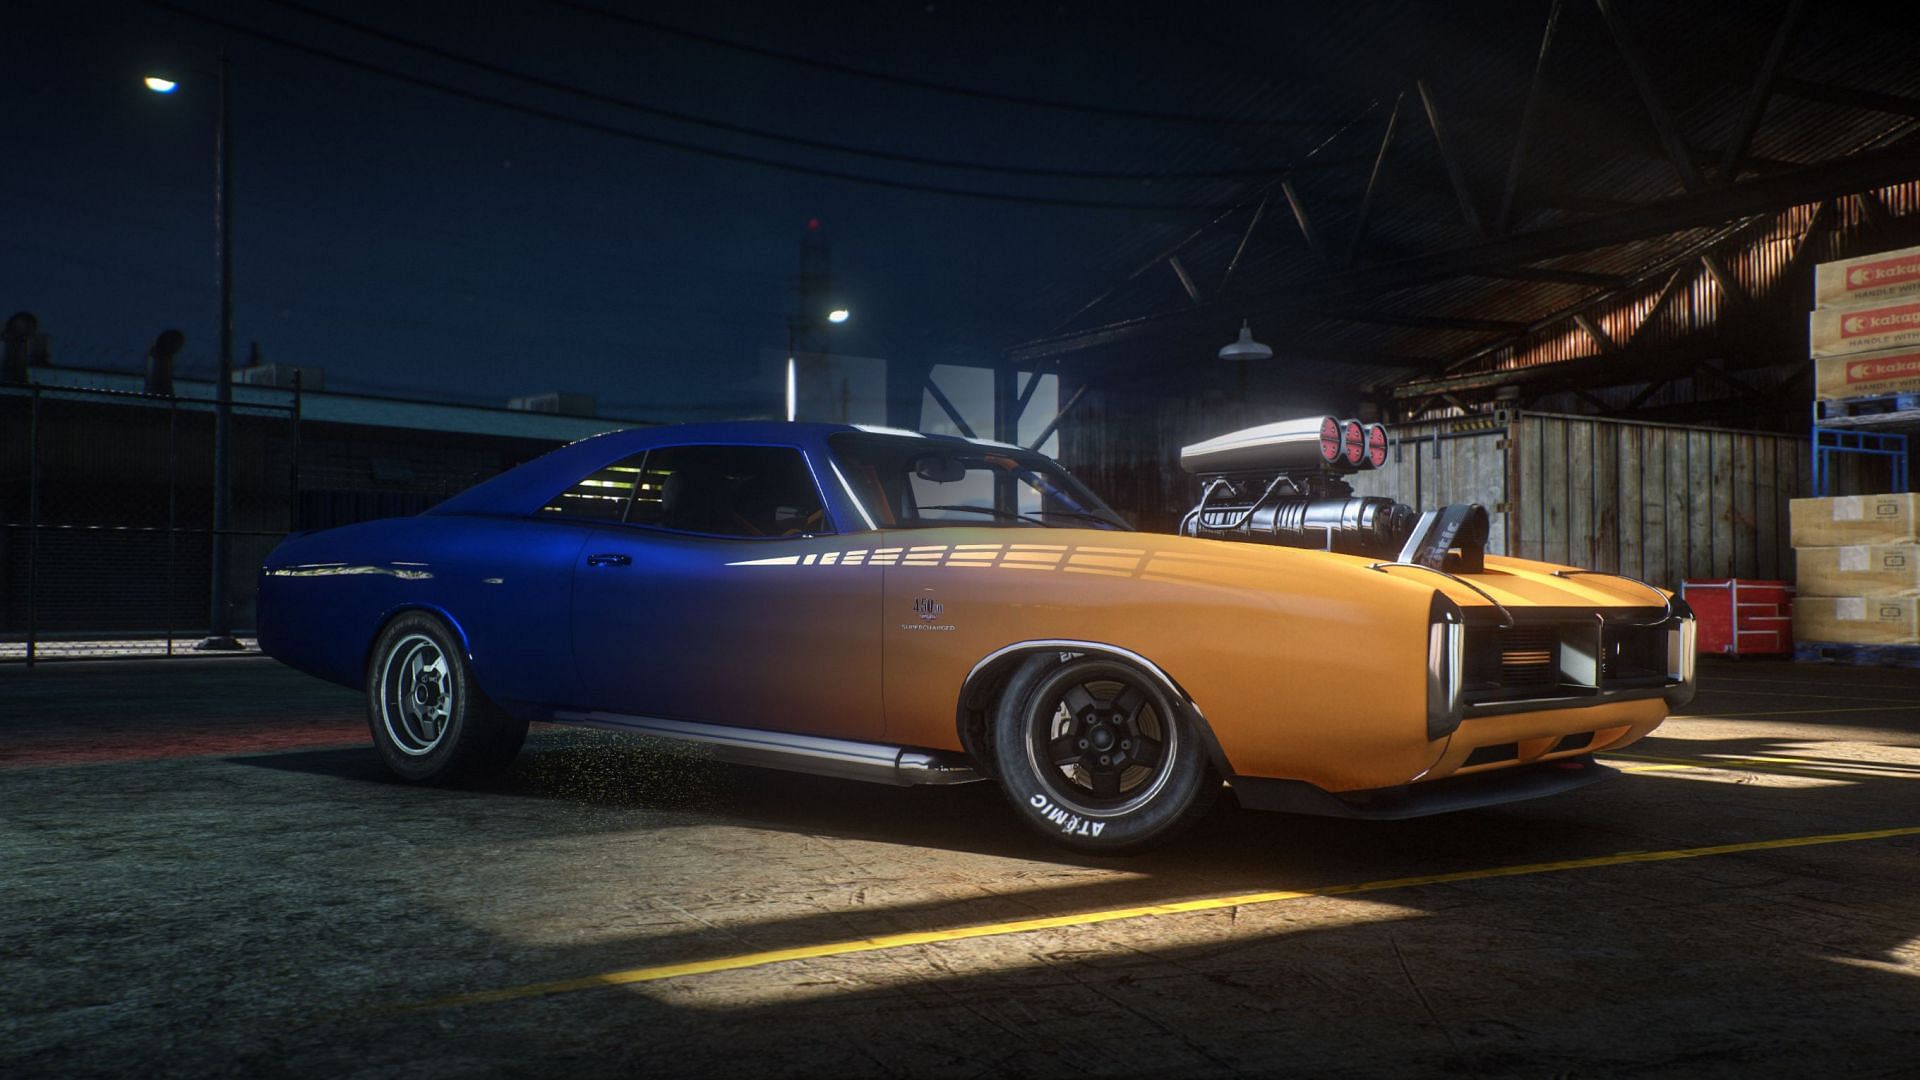 This article features 5 lore-friendly car mods just like the one seen in the picture (Image via forum.gta.world)